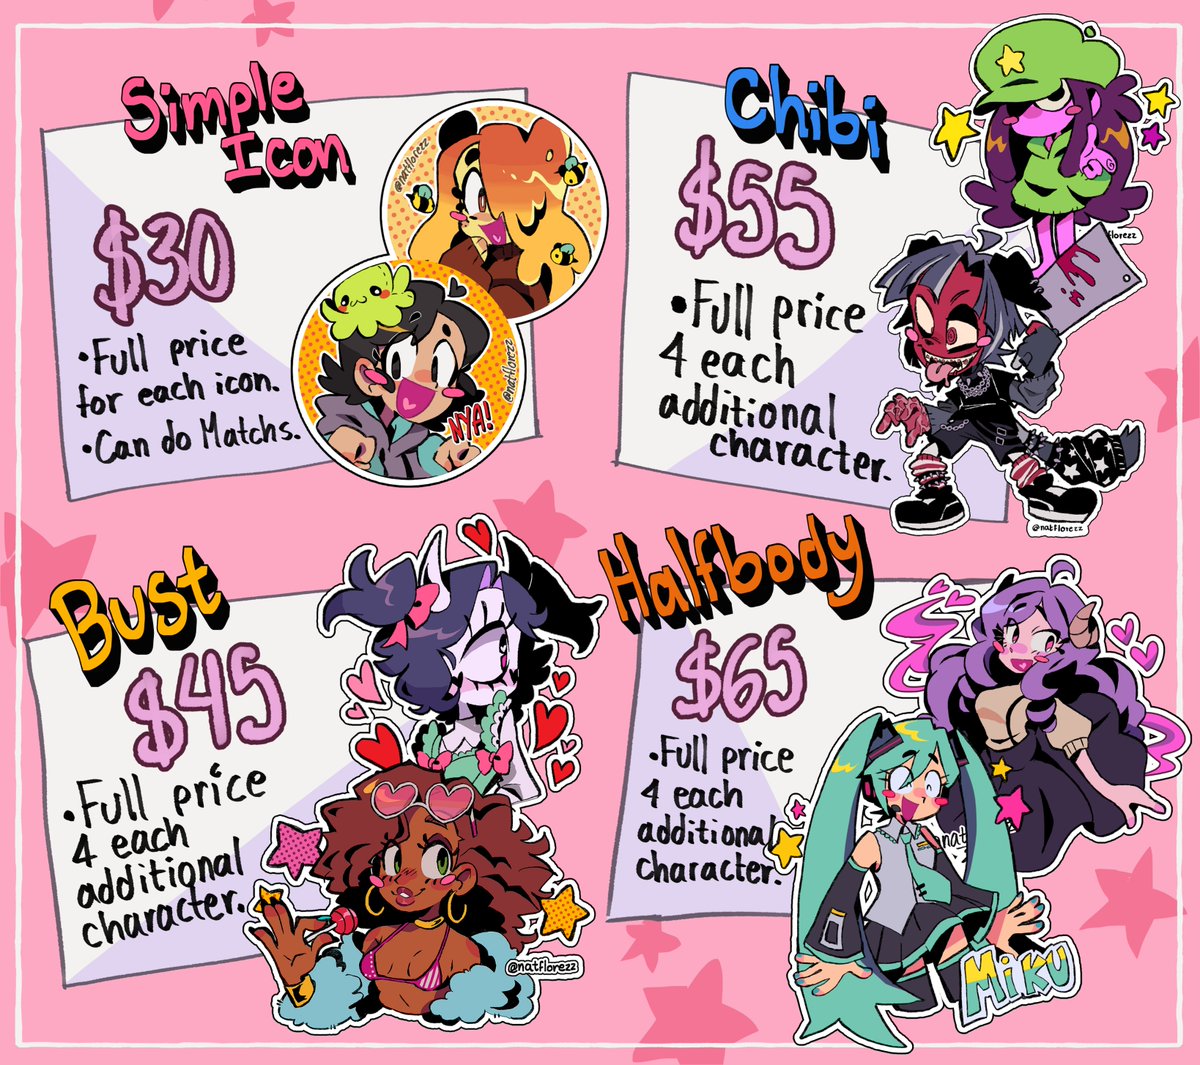 COMMISSIONS OPEN!!

My September commissions are open!
I will be taking commissions until I reach the goal. RTs are very appreciated.

Read the thread for the house updates ⇩

•COMMISSIONS T.O.S n' FORM•
https://t.co/F4KvSxhayi 